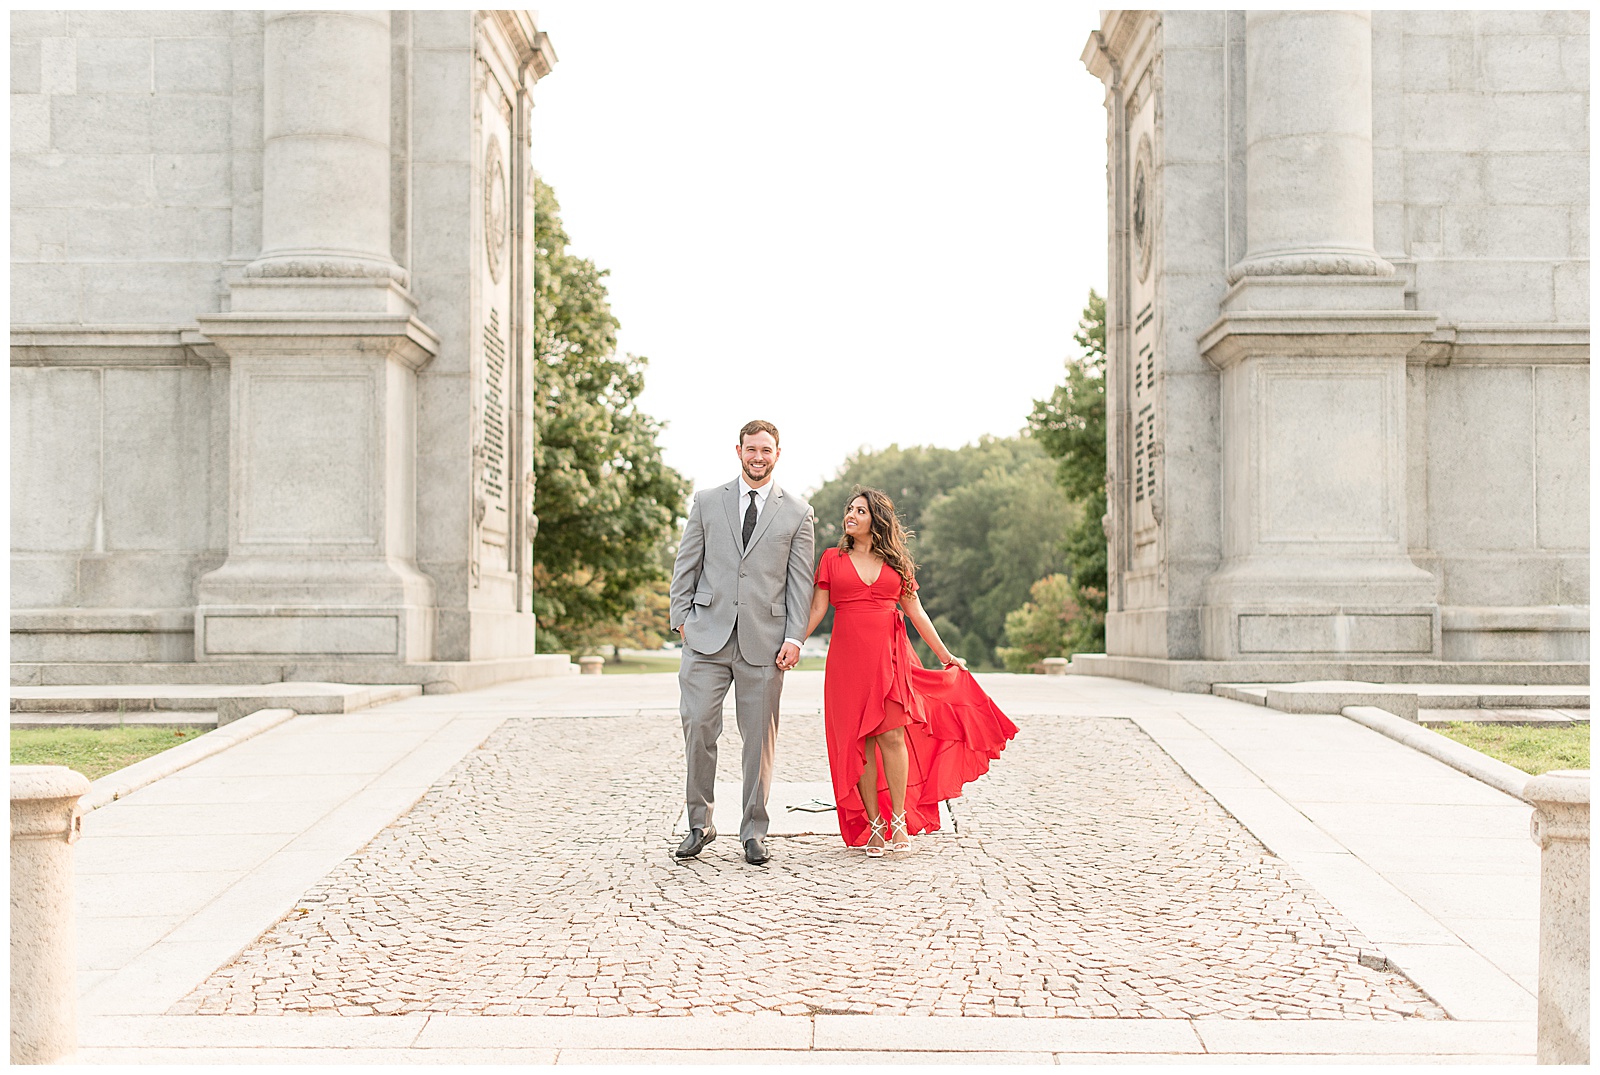 couple is under large archway with trees behind them and they are walking towards the camera with the guy on the left and his right hand in his pocket and the girl is on the right with her right arm wrapped around his left arm and her left arm is holding her red dress out to the side and they are looking at the camera and smiling at the National Memorial Arch in Valley Forge, PA